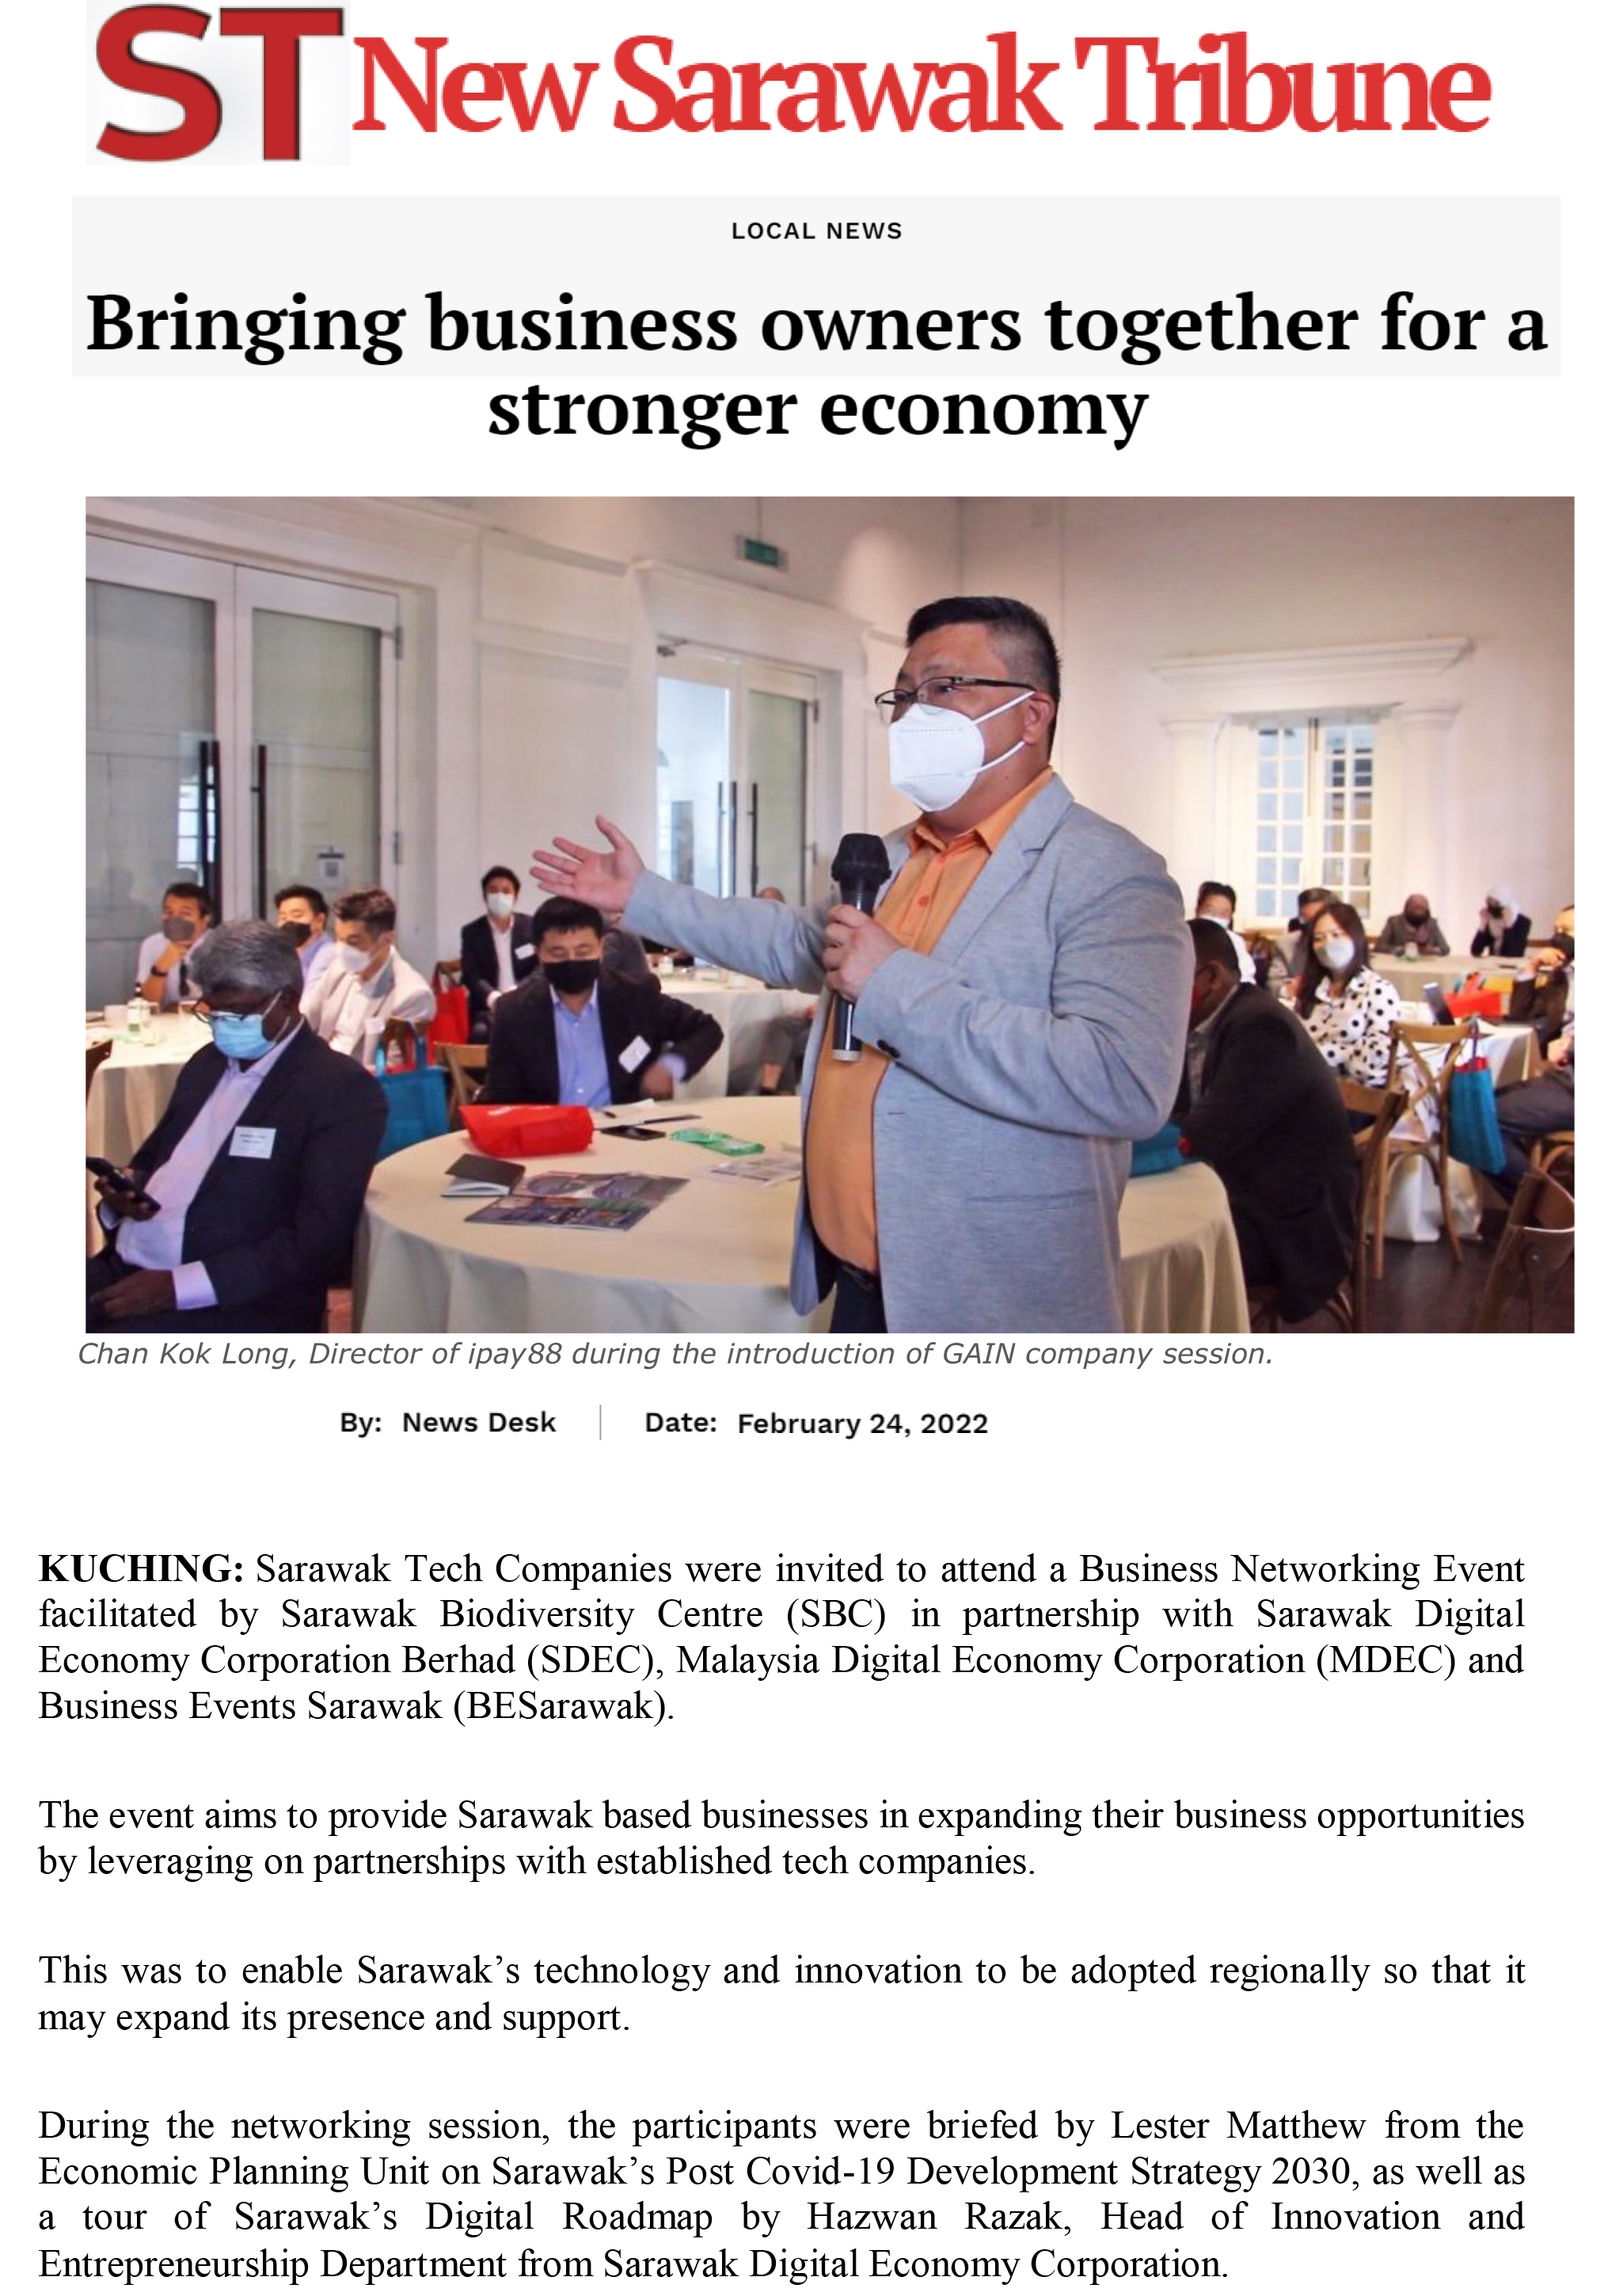 Bringing business owners together for a stronger economy